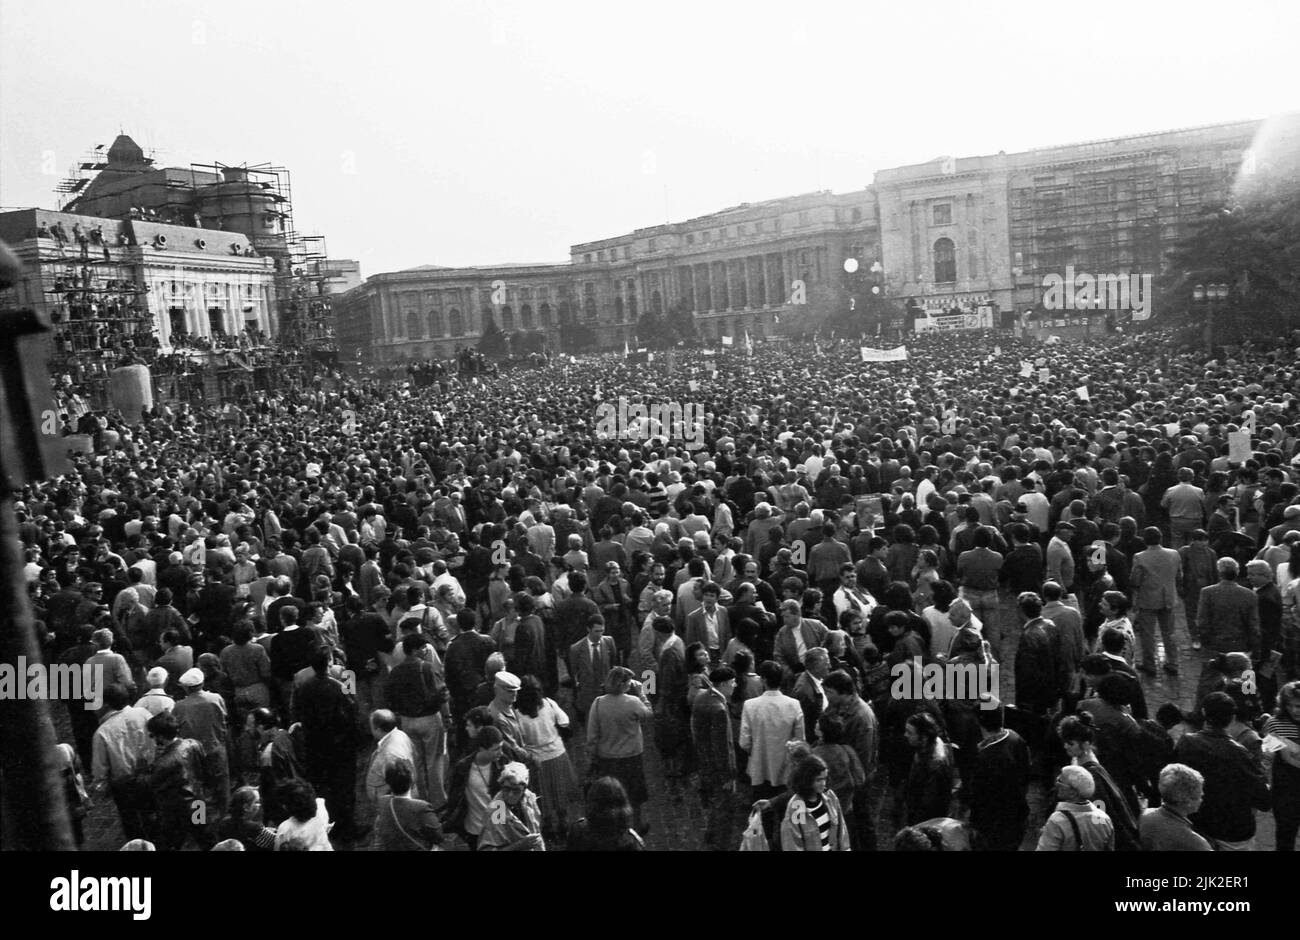 Bucharest, Romania, September 1992. Political rally organized by Romanian Democratic Convention (CDR) before the presidential elections of 1992. Huge crowd in the Revolution Square, with many people standing on the scaffolding used around on the buildings damaged in the revolution of 1989. Stock Photo